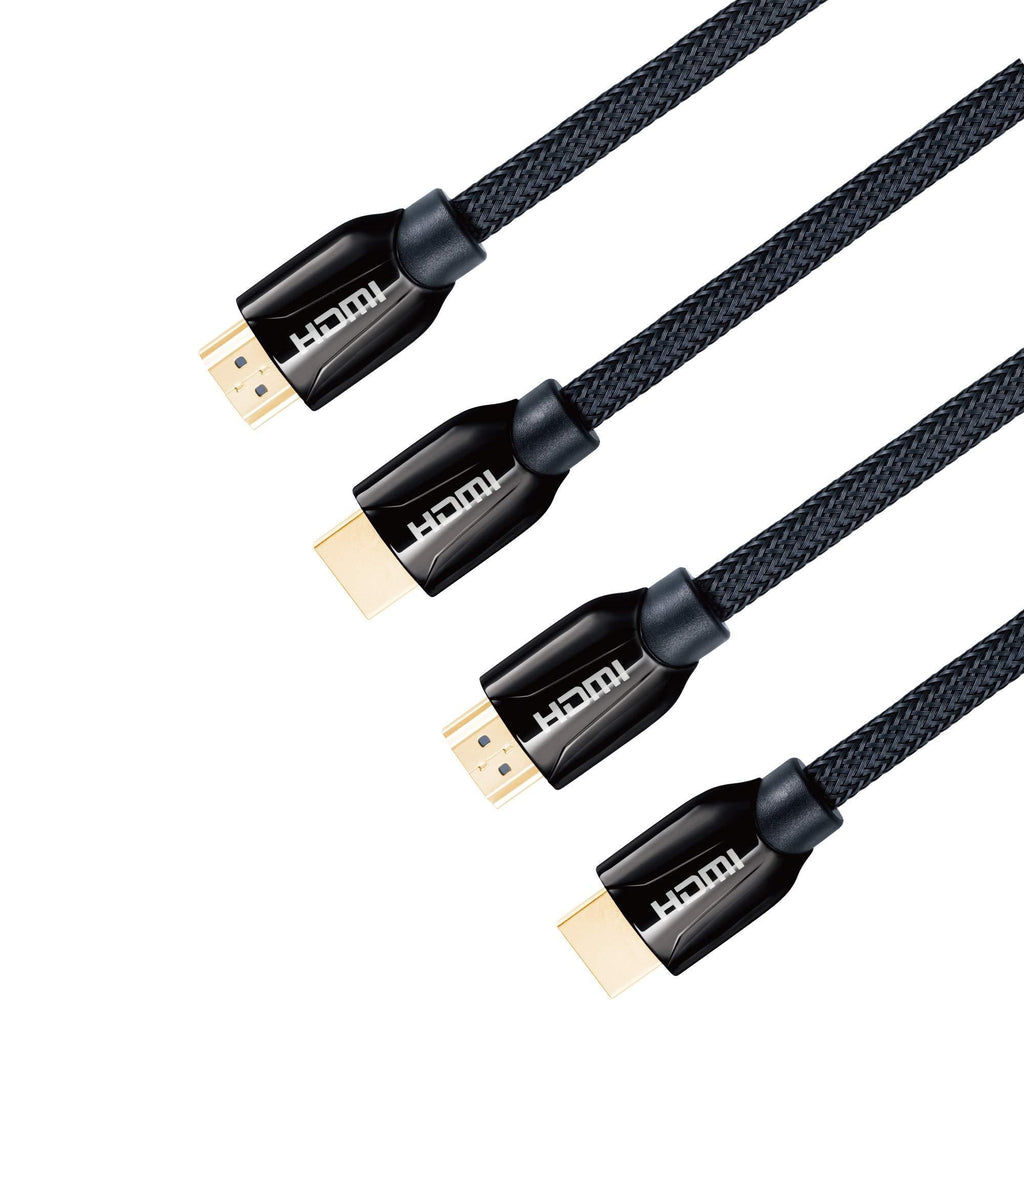 JAVEX [2 Pack] Pure Copper HDMI Cable, Metal Connector, Nylon Braided Protection, 4K@60Hz 18Gpbs, 1.8M(6FT)+ 3M(10FT) 6FT+10FT Braided